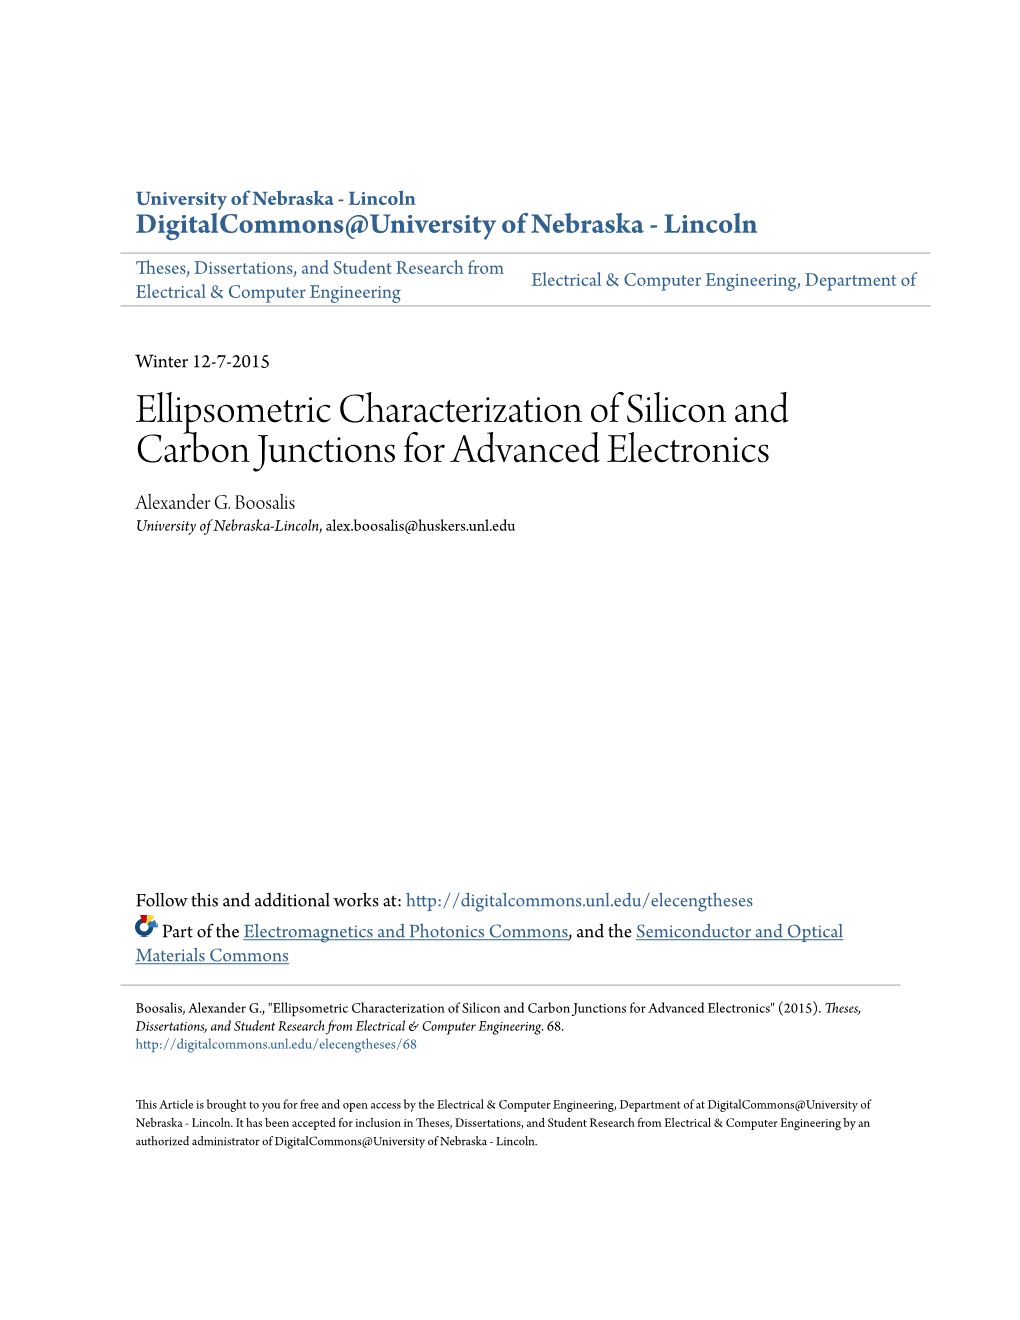 Ellipsometric Characterization of Silicon and Carbon Junctions for Advanced Electronics Alexander G